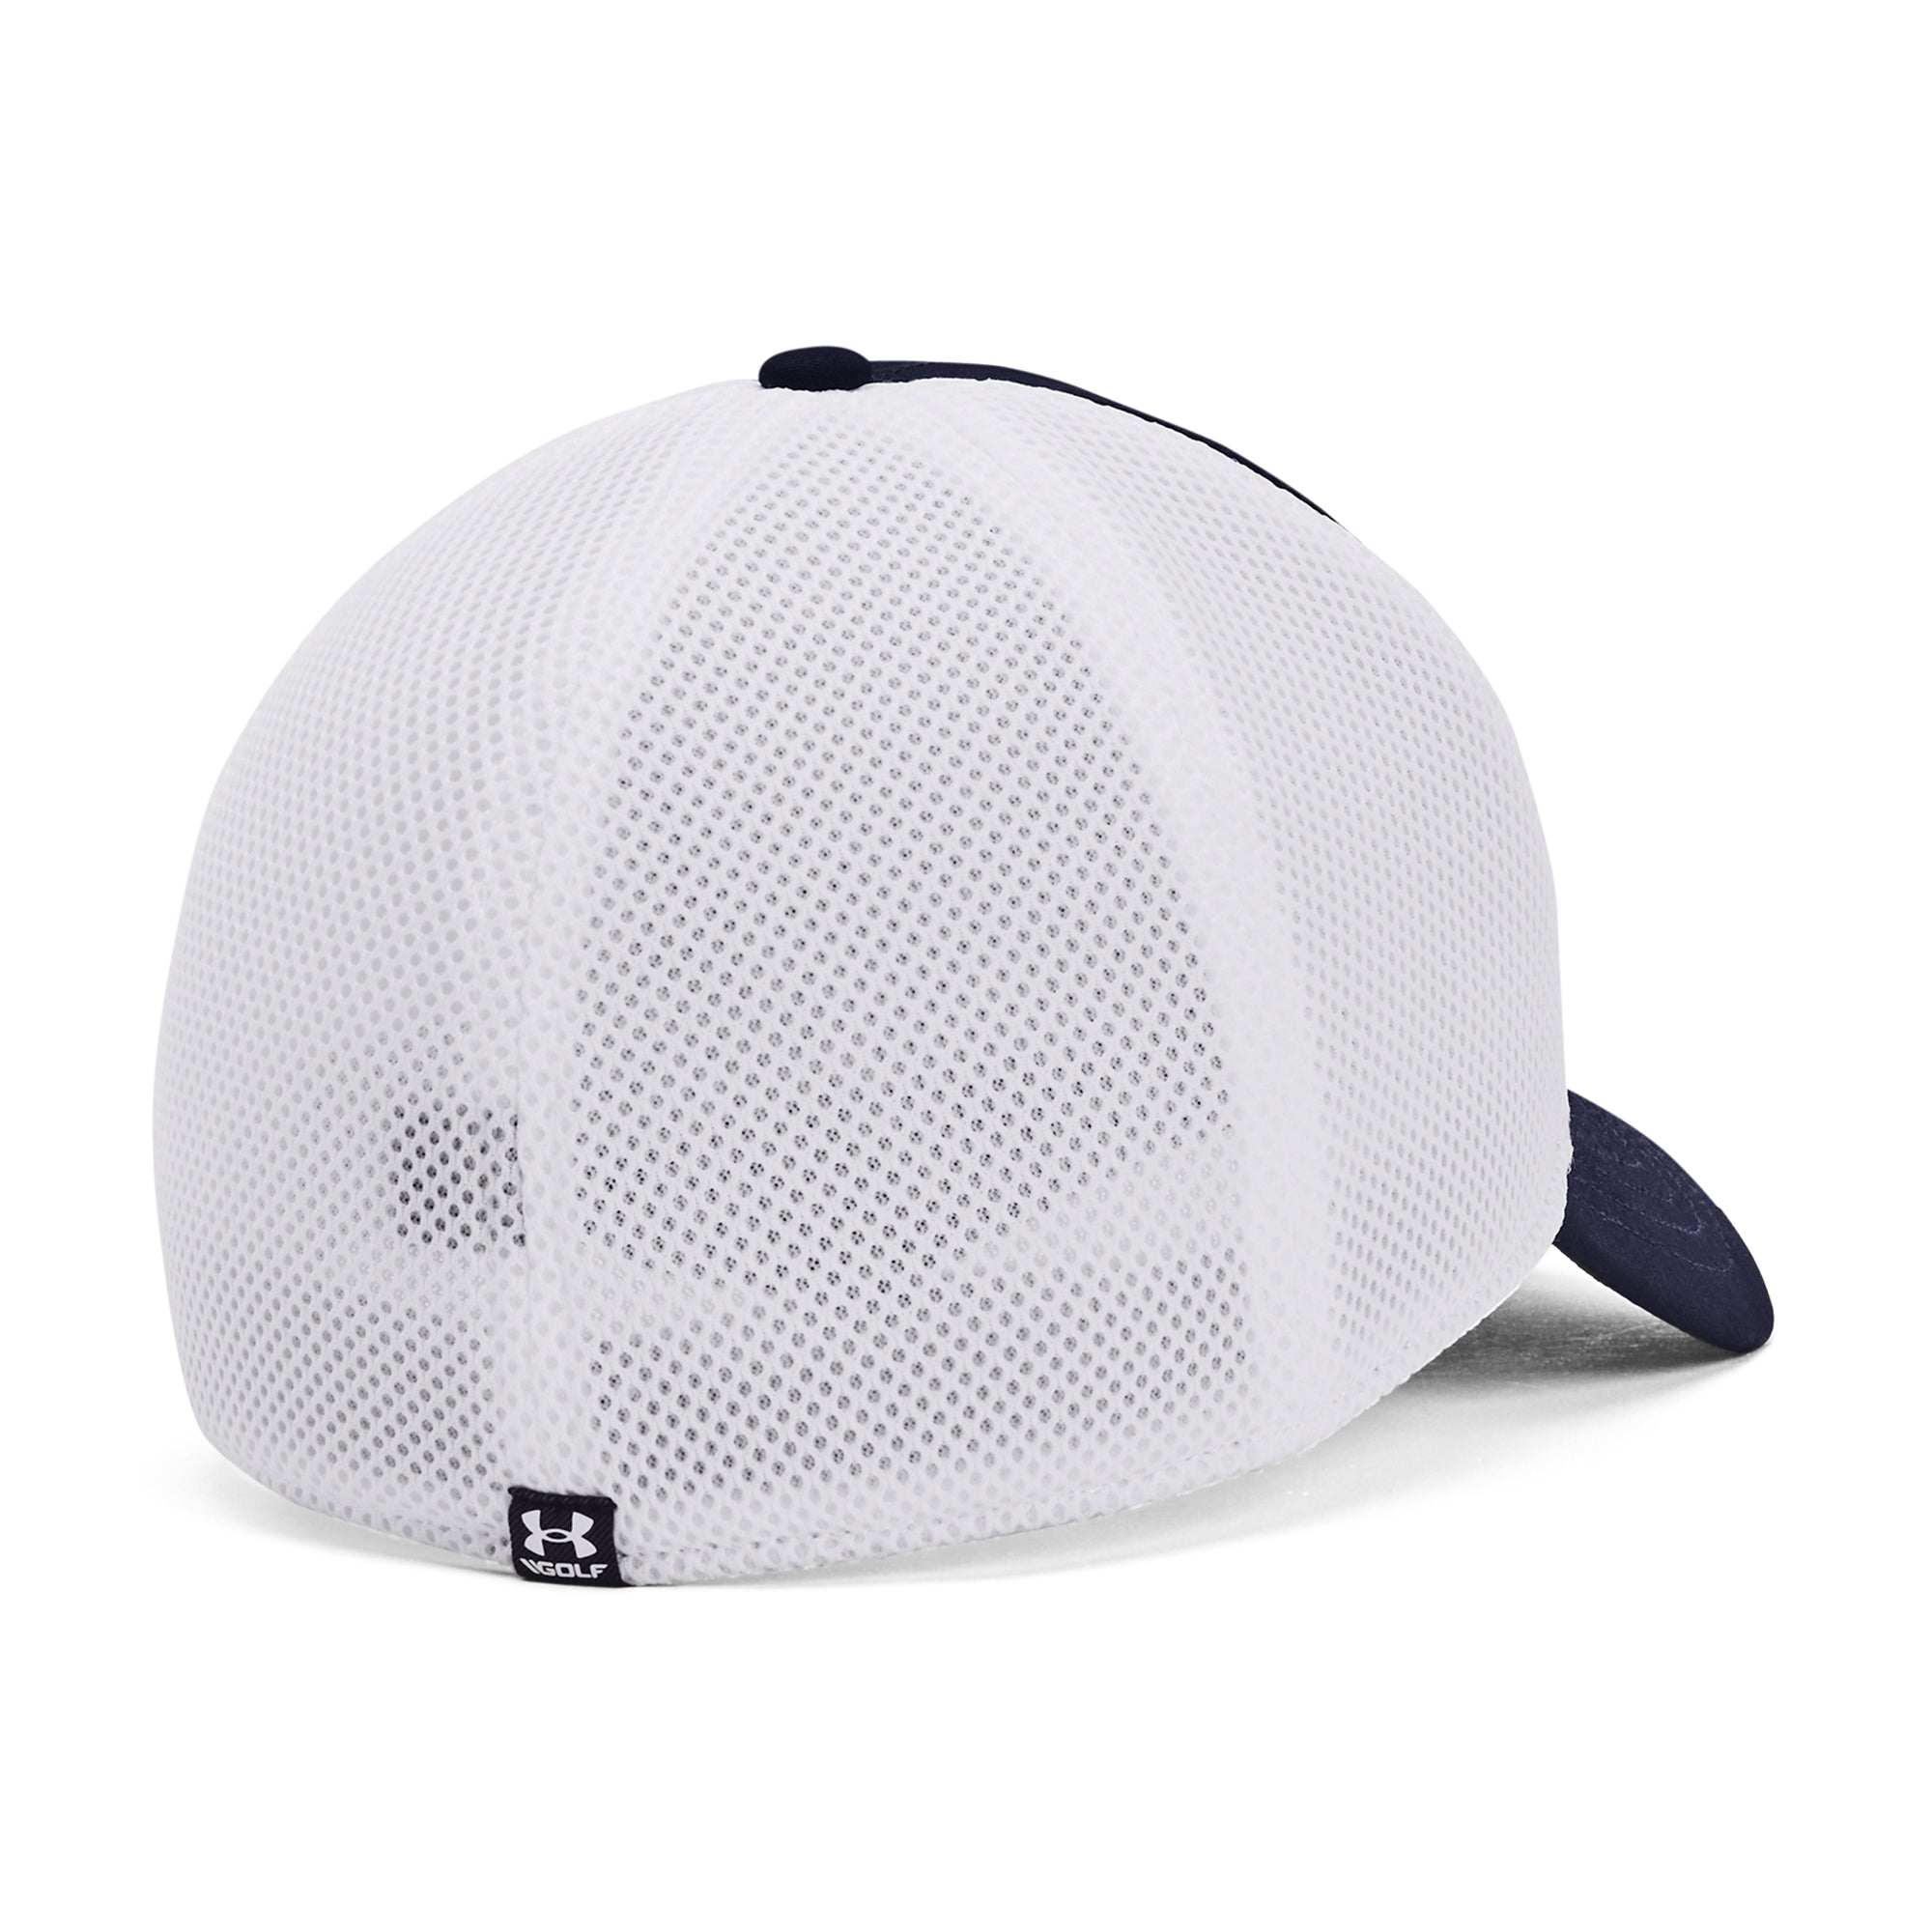 copy-of-under-armour-golf-iso-chill-driver-mesh-cap-1369804-midnight-blue-410